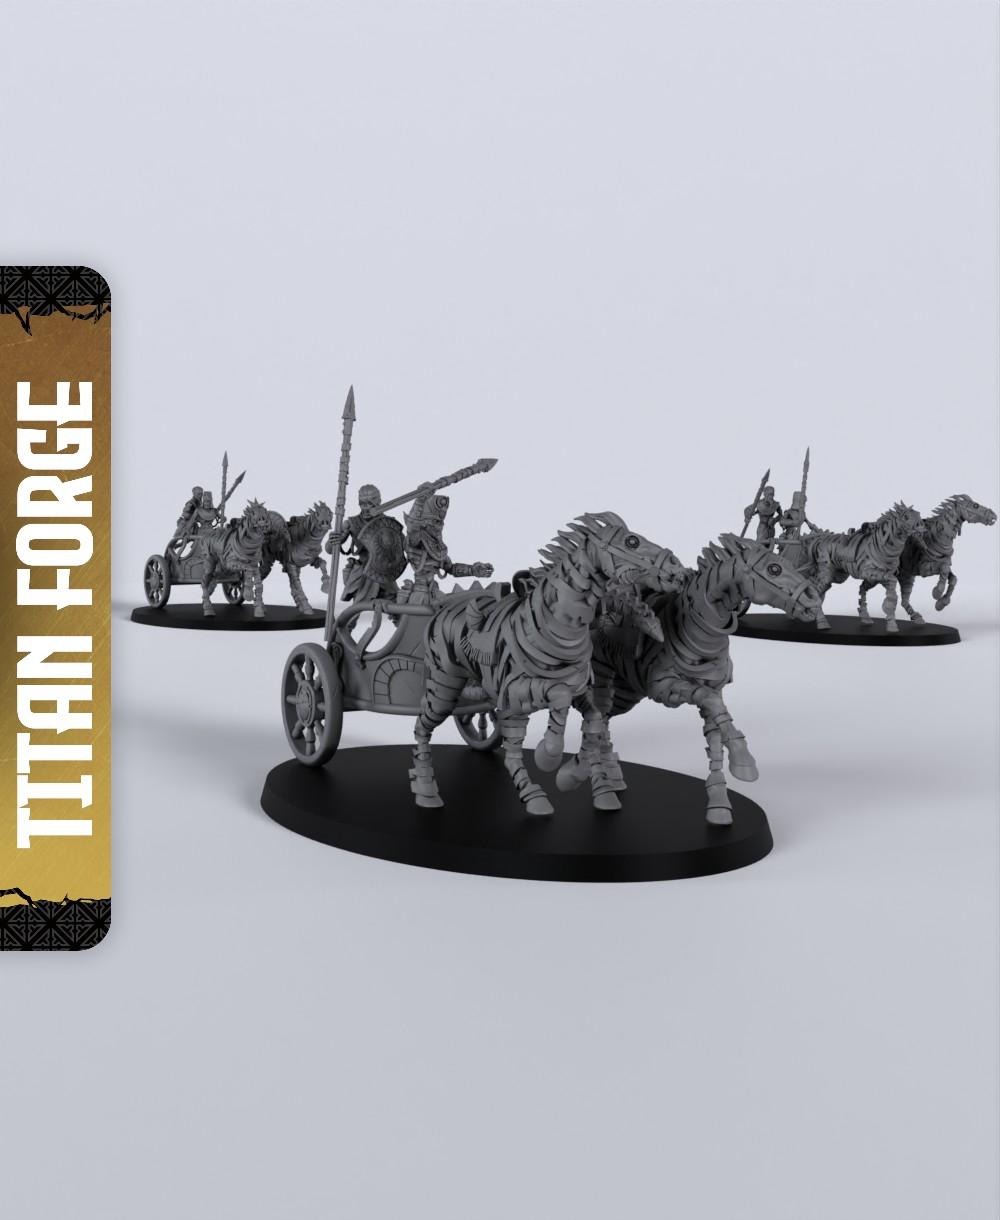 Chariots - With Free Dragon Warhammer - 5e DnD Inspired for RPG and Wargamers 3d model